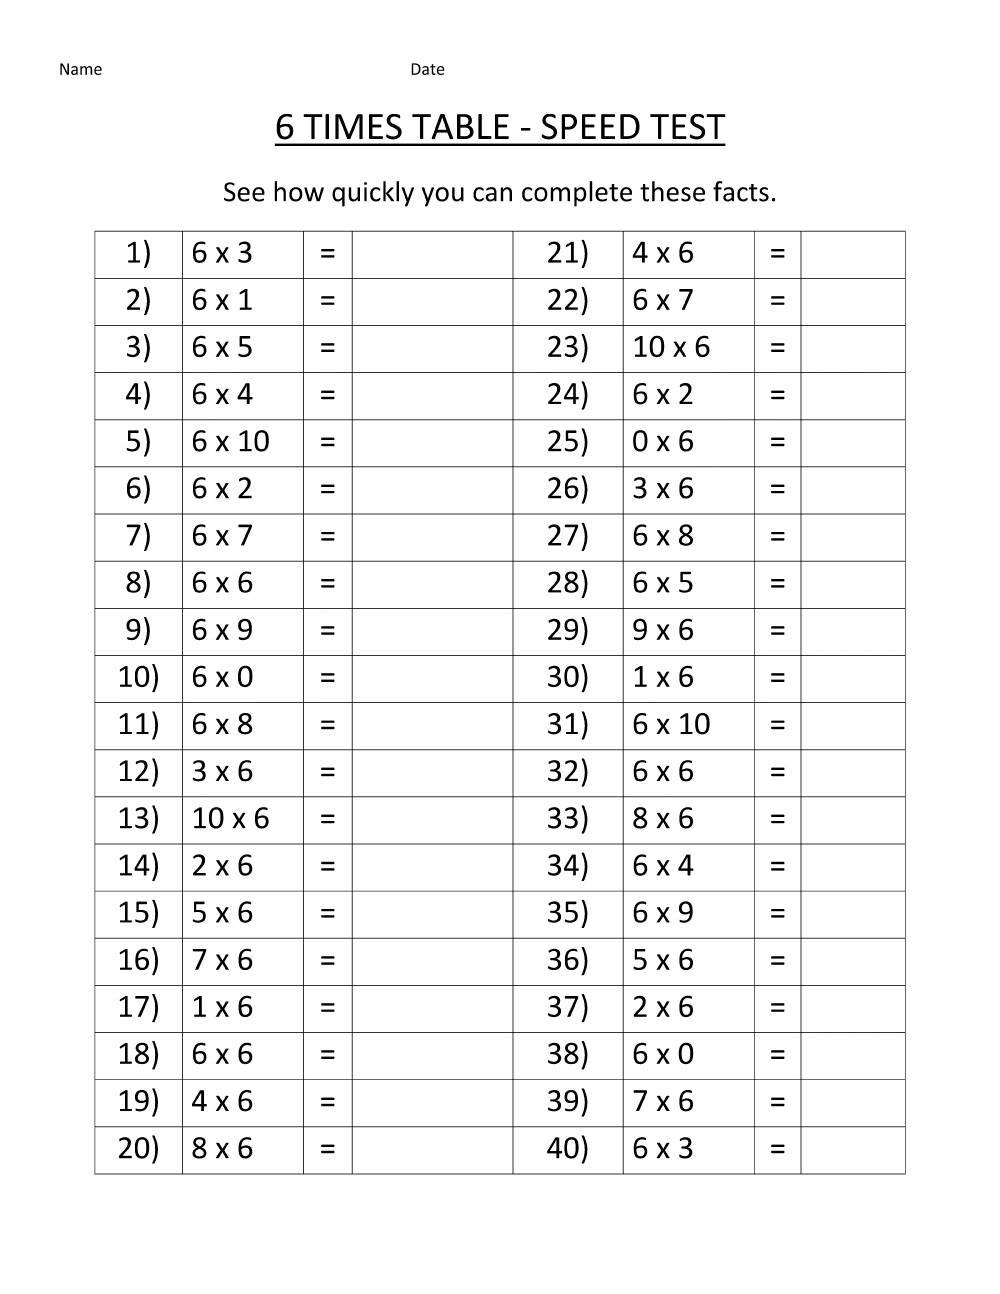 6 Times Table Worksheets Printable | Activity Shelter with regard to Multiplication Worksheets 6 Times Tables